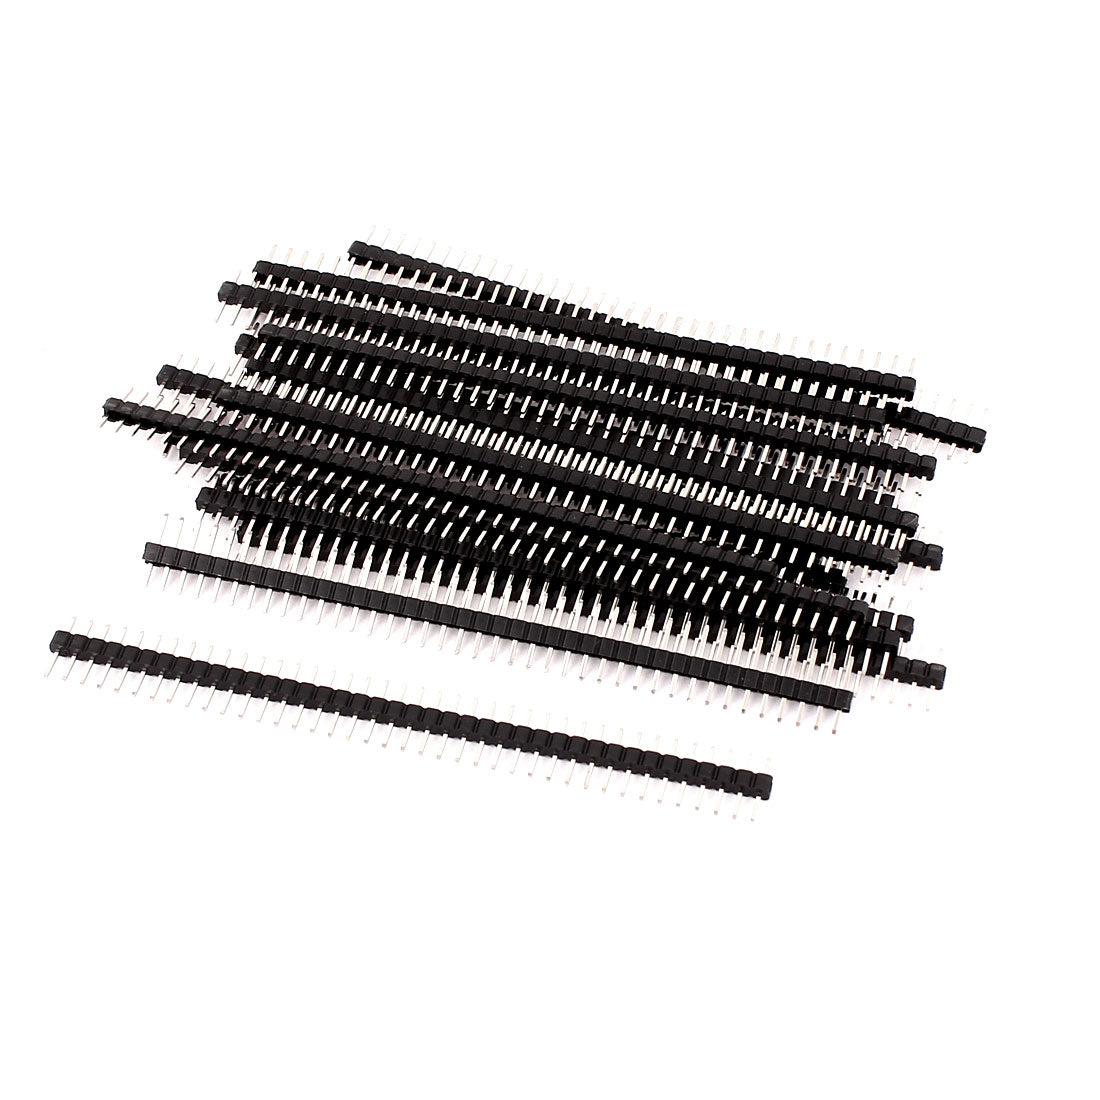 uxcell Uxcell 18 Pcs PBC Mount 40Pin 2.0mm Pitch Single Row Straight Male Header Connector Strip